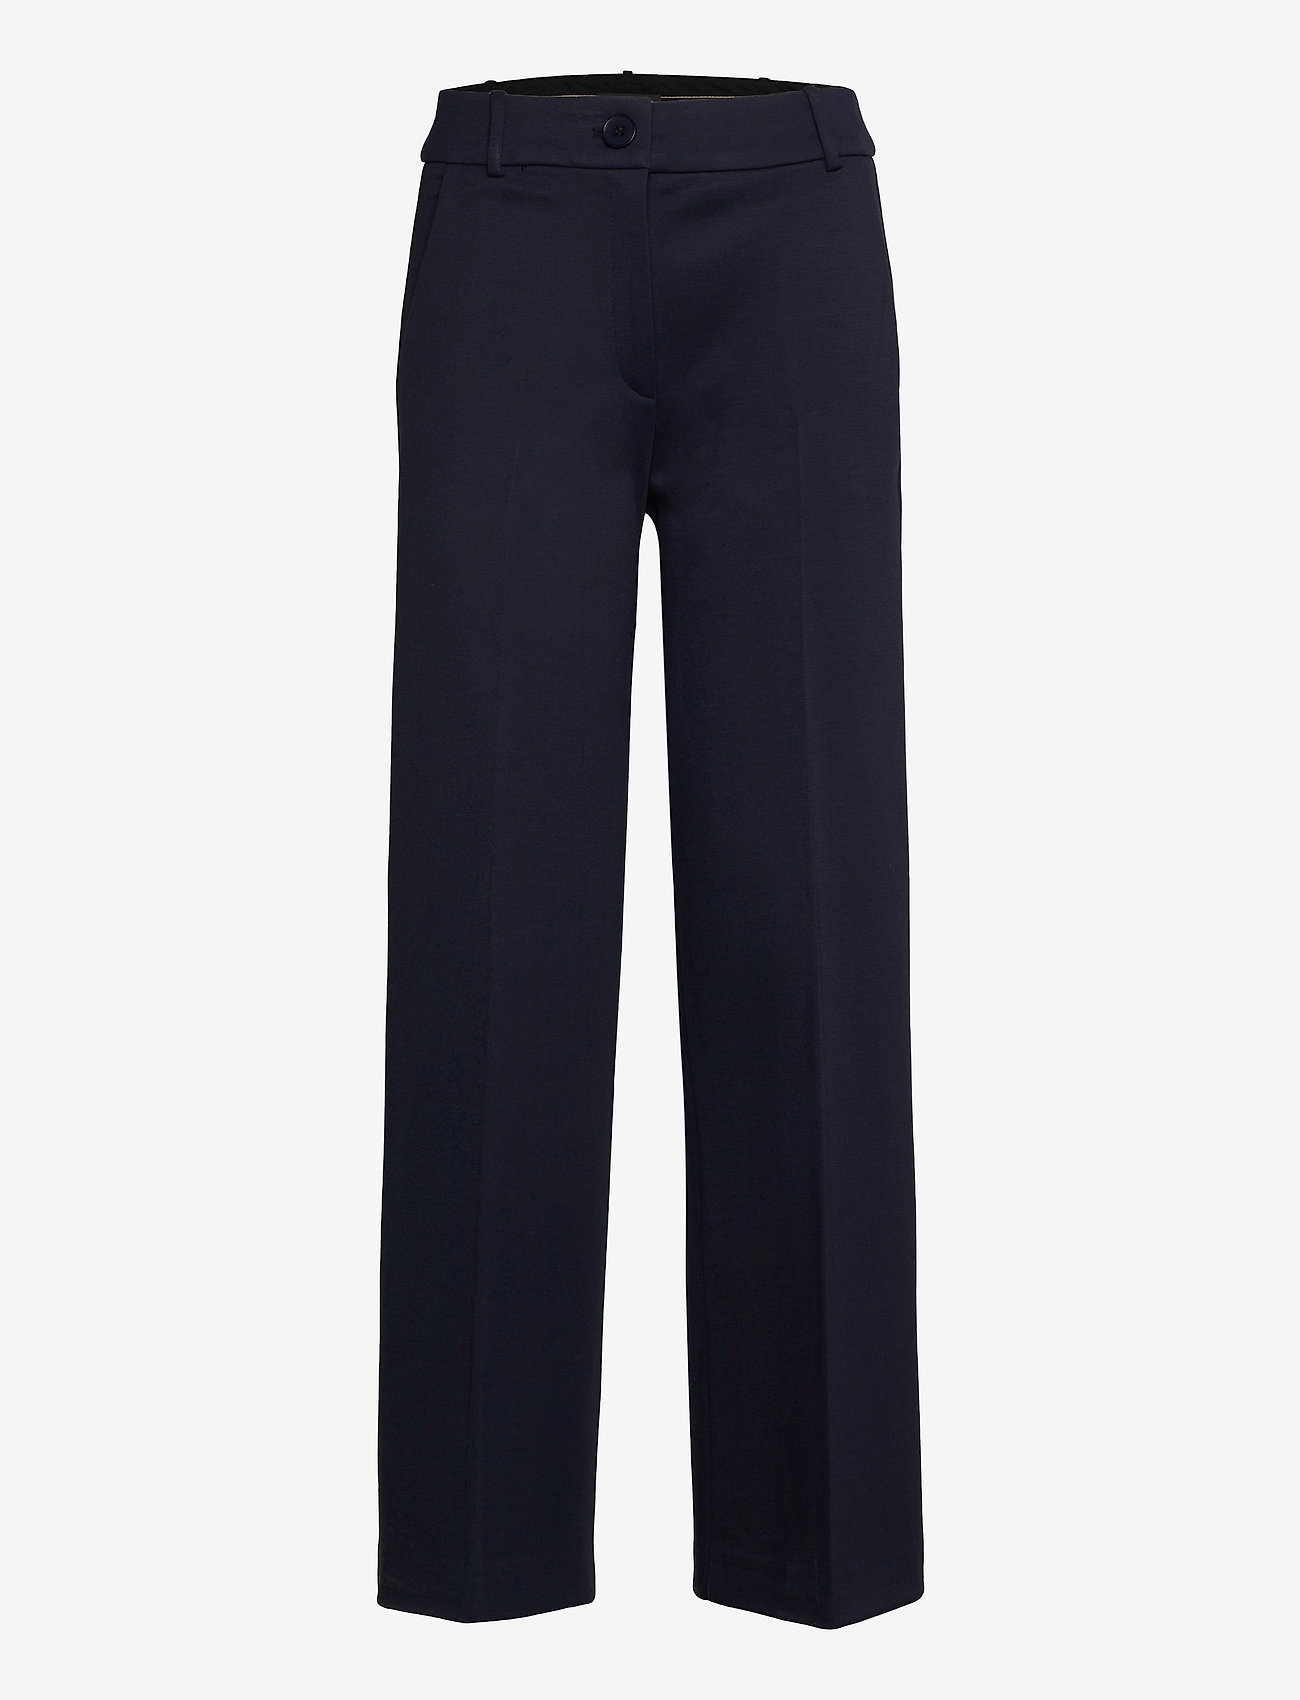 Esprit Collection - Pants woven - tailored trousers - navy - 0